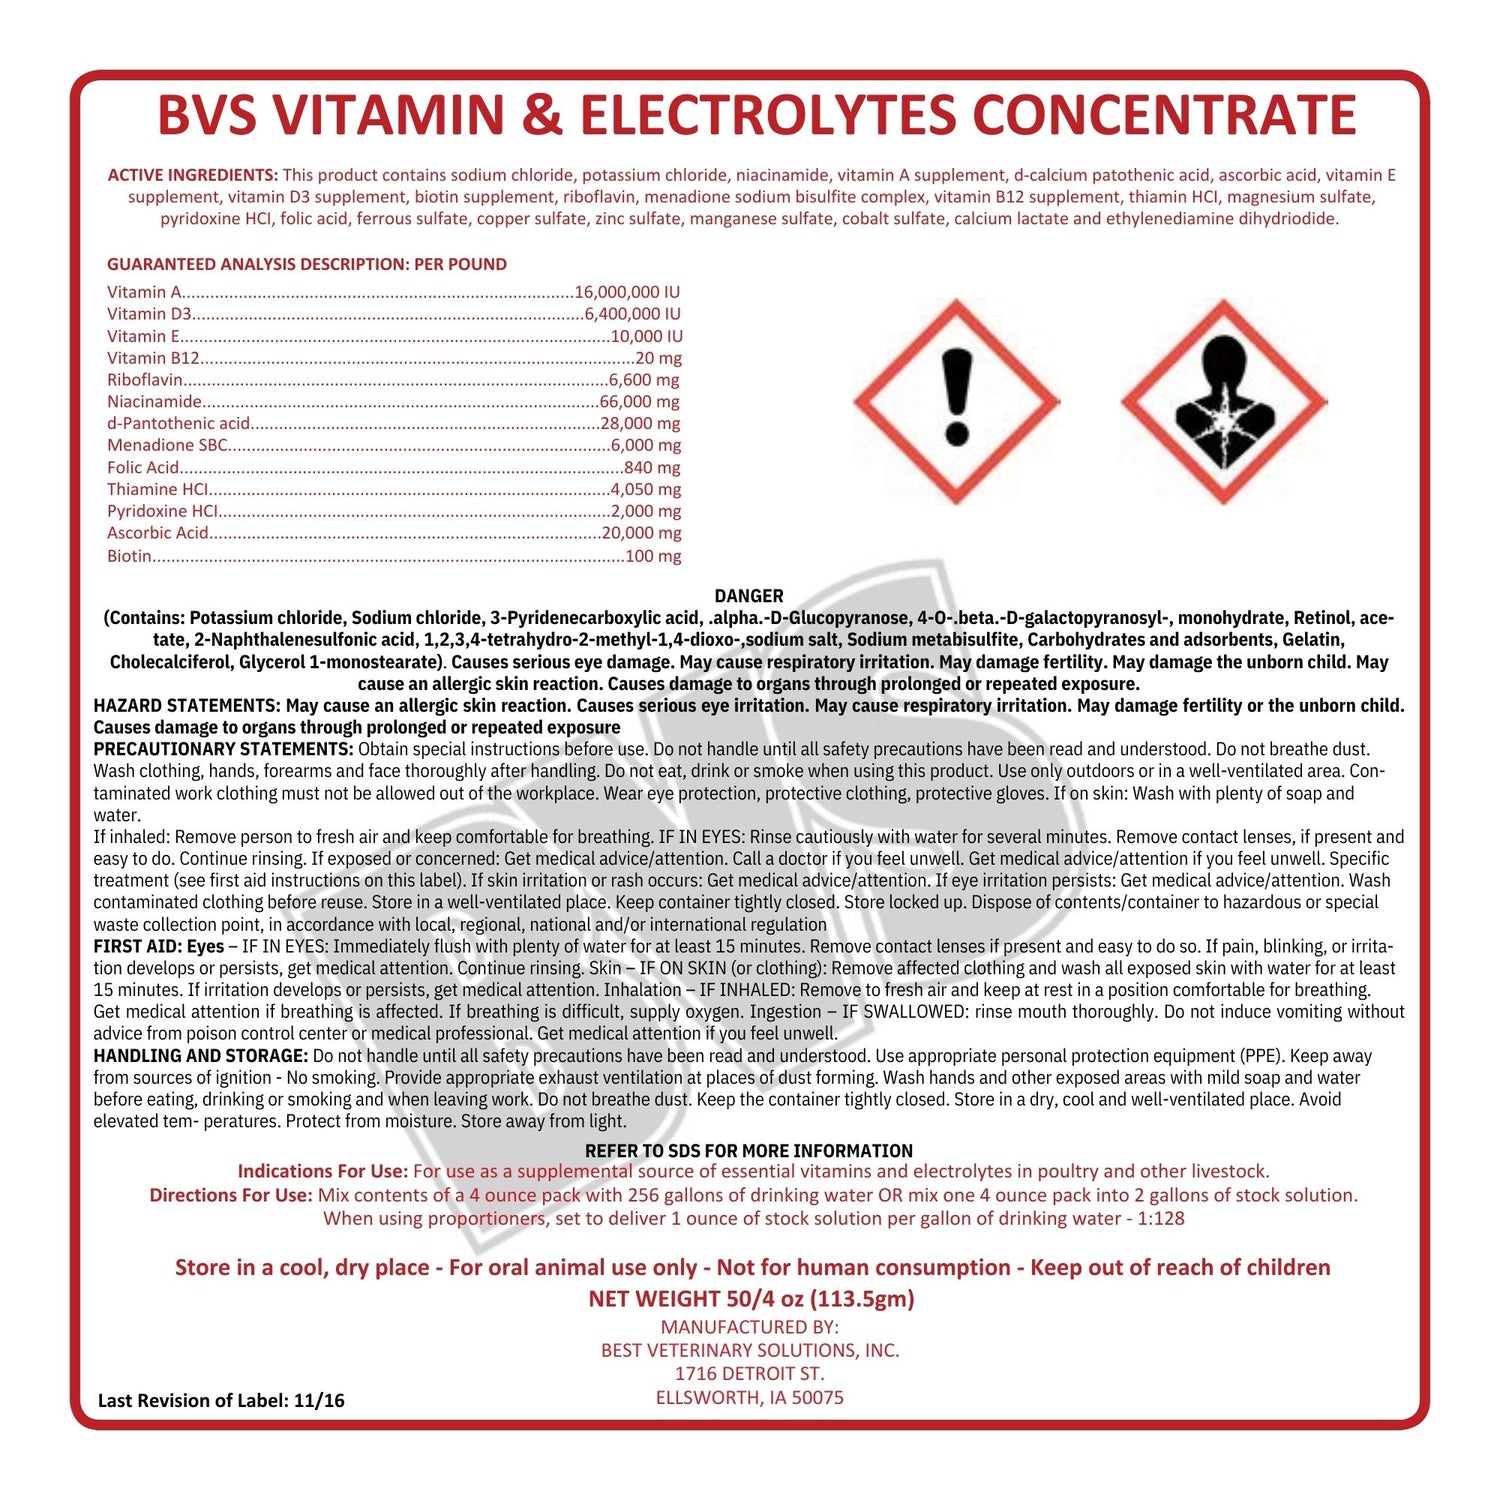 BVS Vitamin and Electrolyte Concentrate is a concentrated blend of vitamins and electrolytes designed for addition to the drinking water of poultry and livestock.